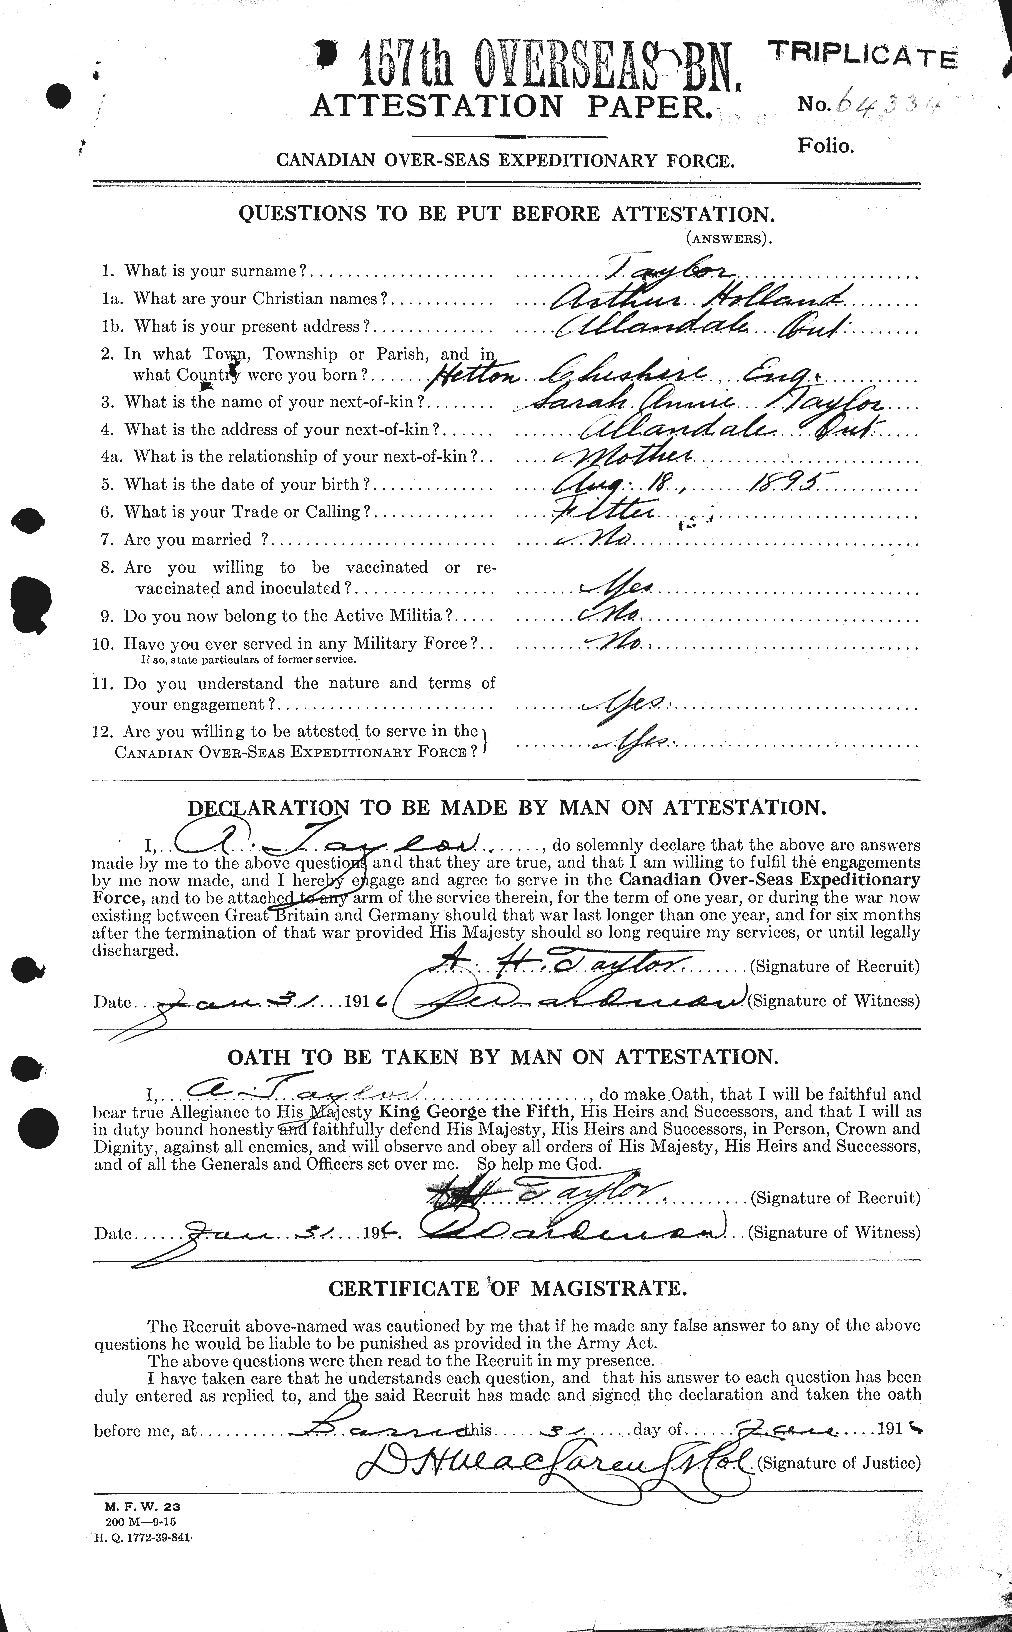 Personnel Records of the First World War - CEF 626728a